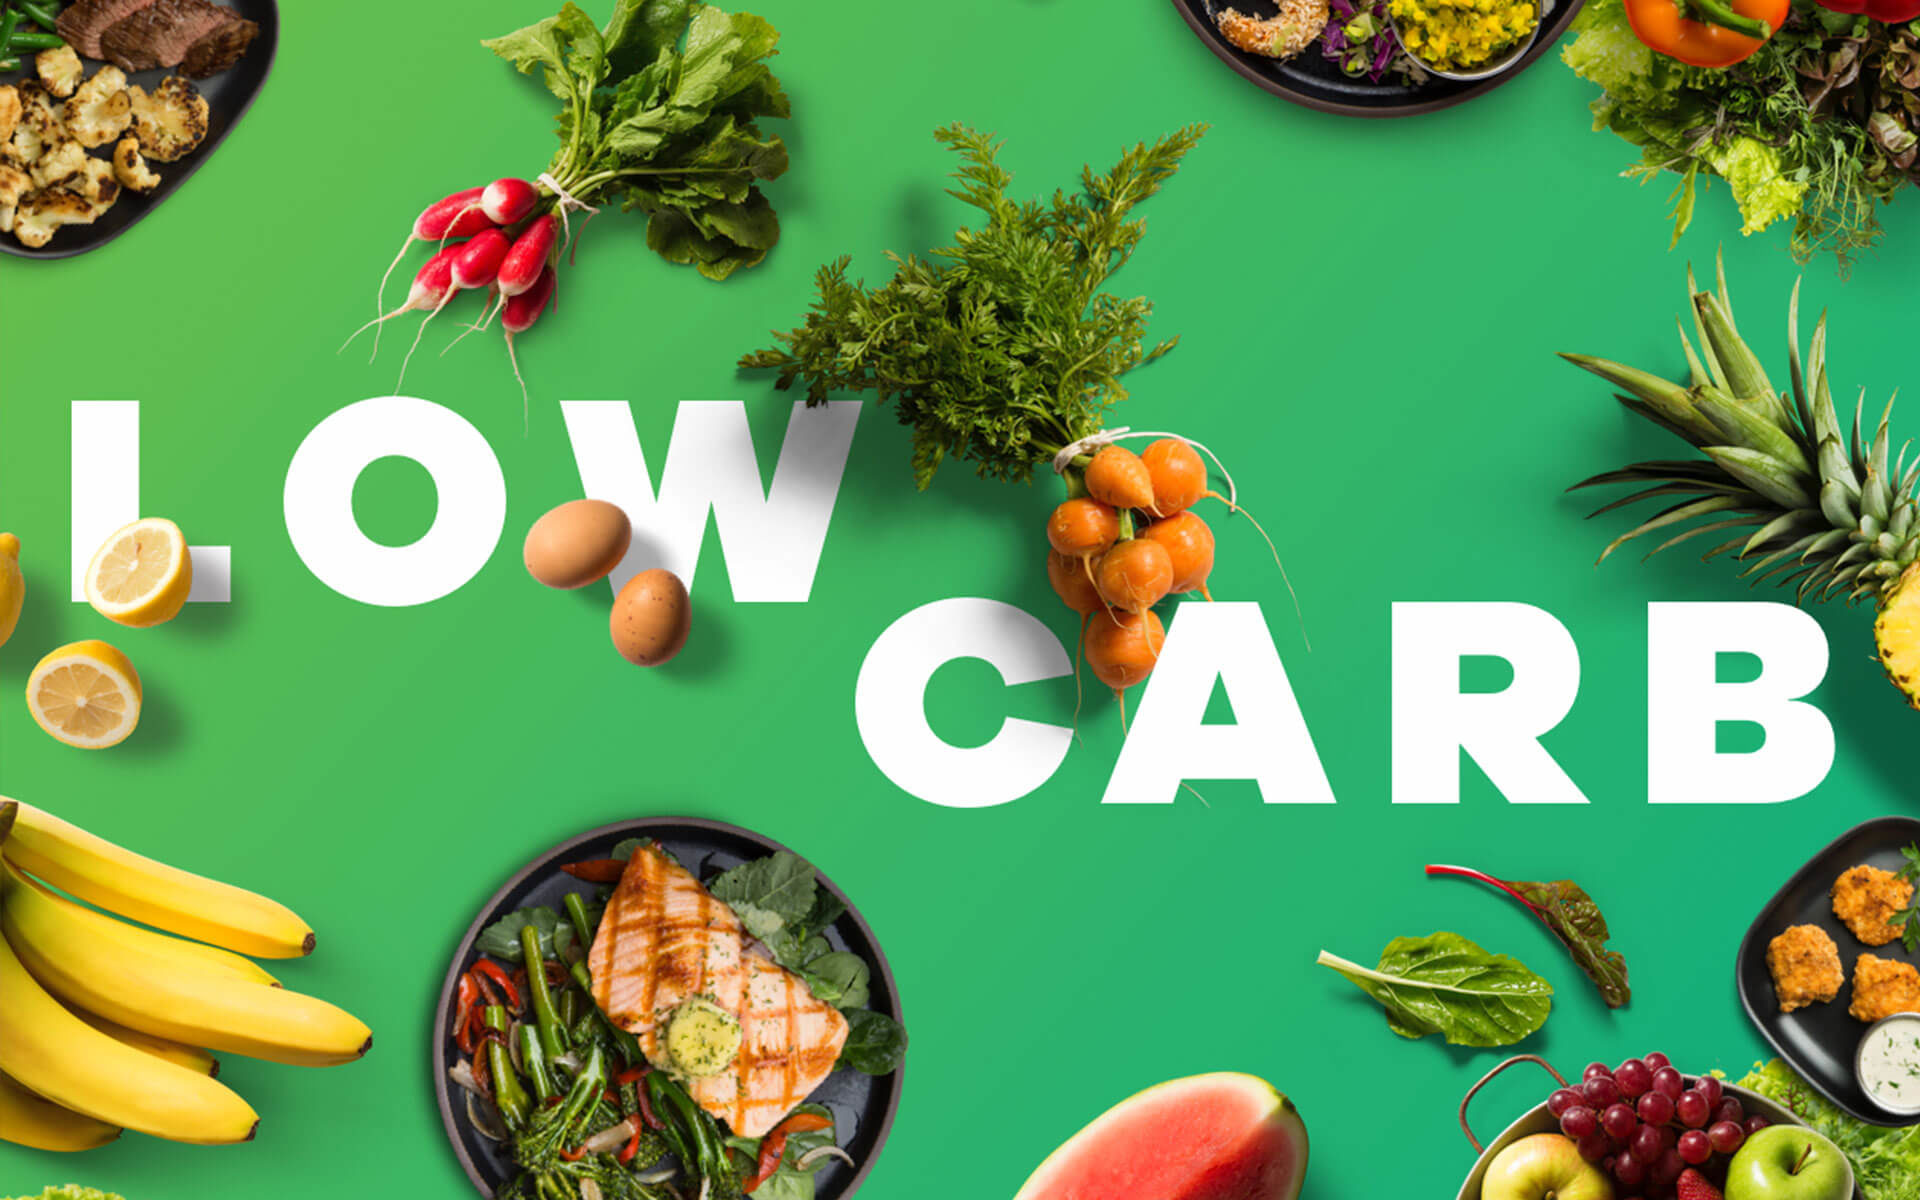 the words Low Carb on a green background surrounded by fruits and veggies